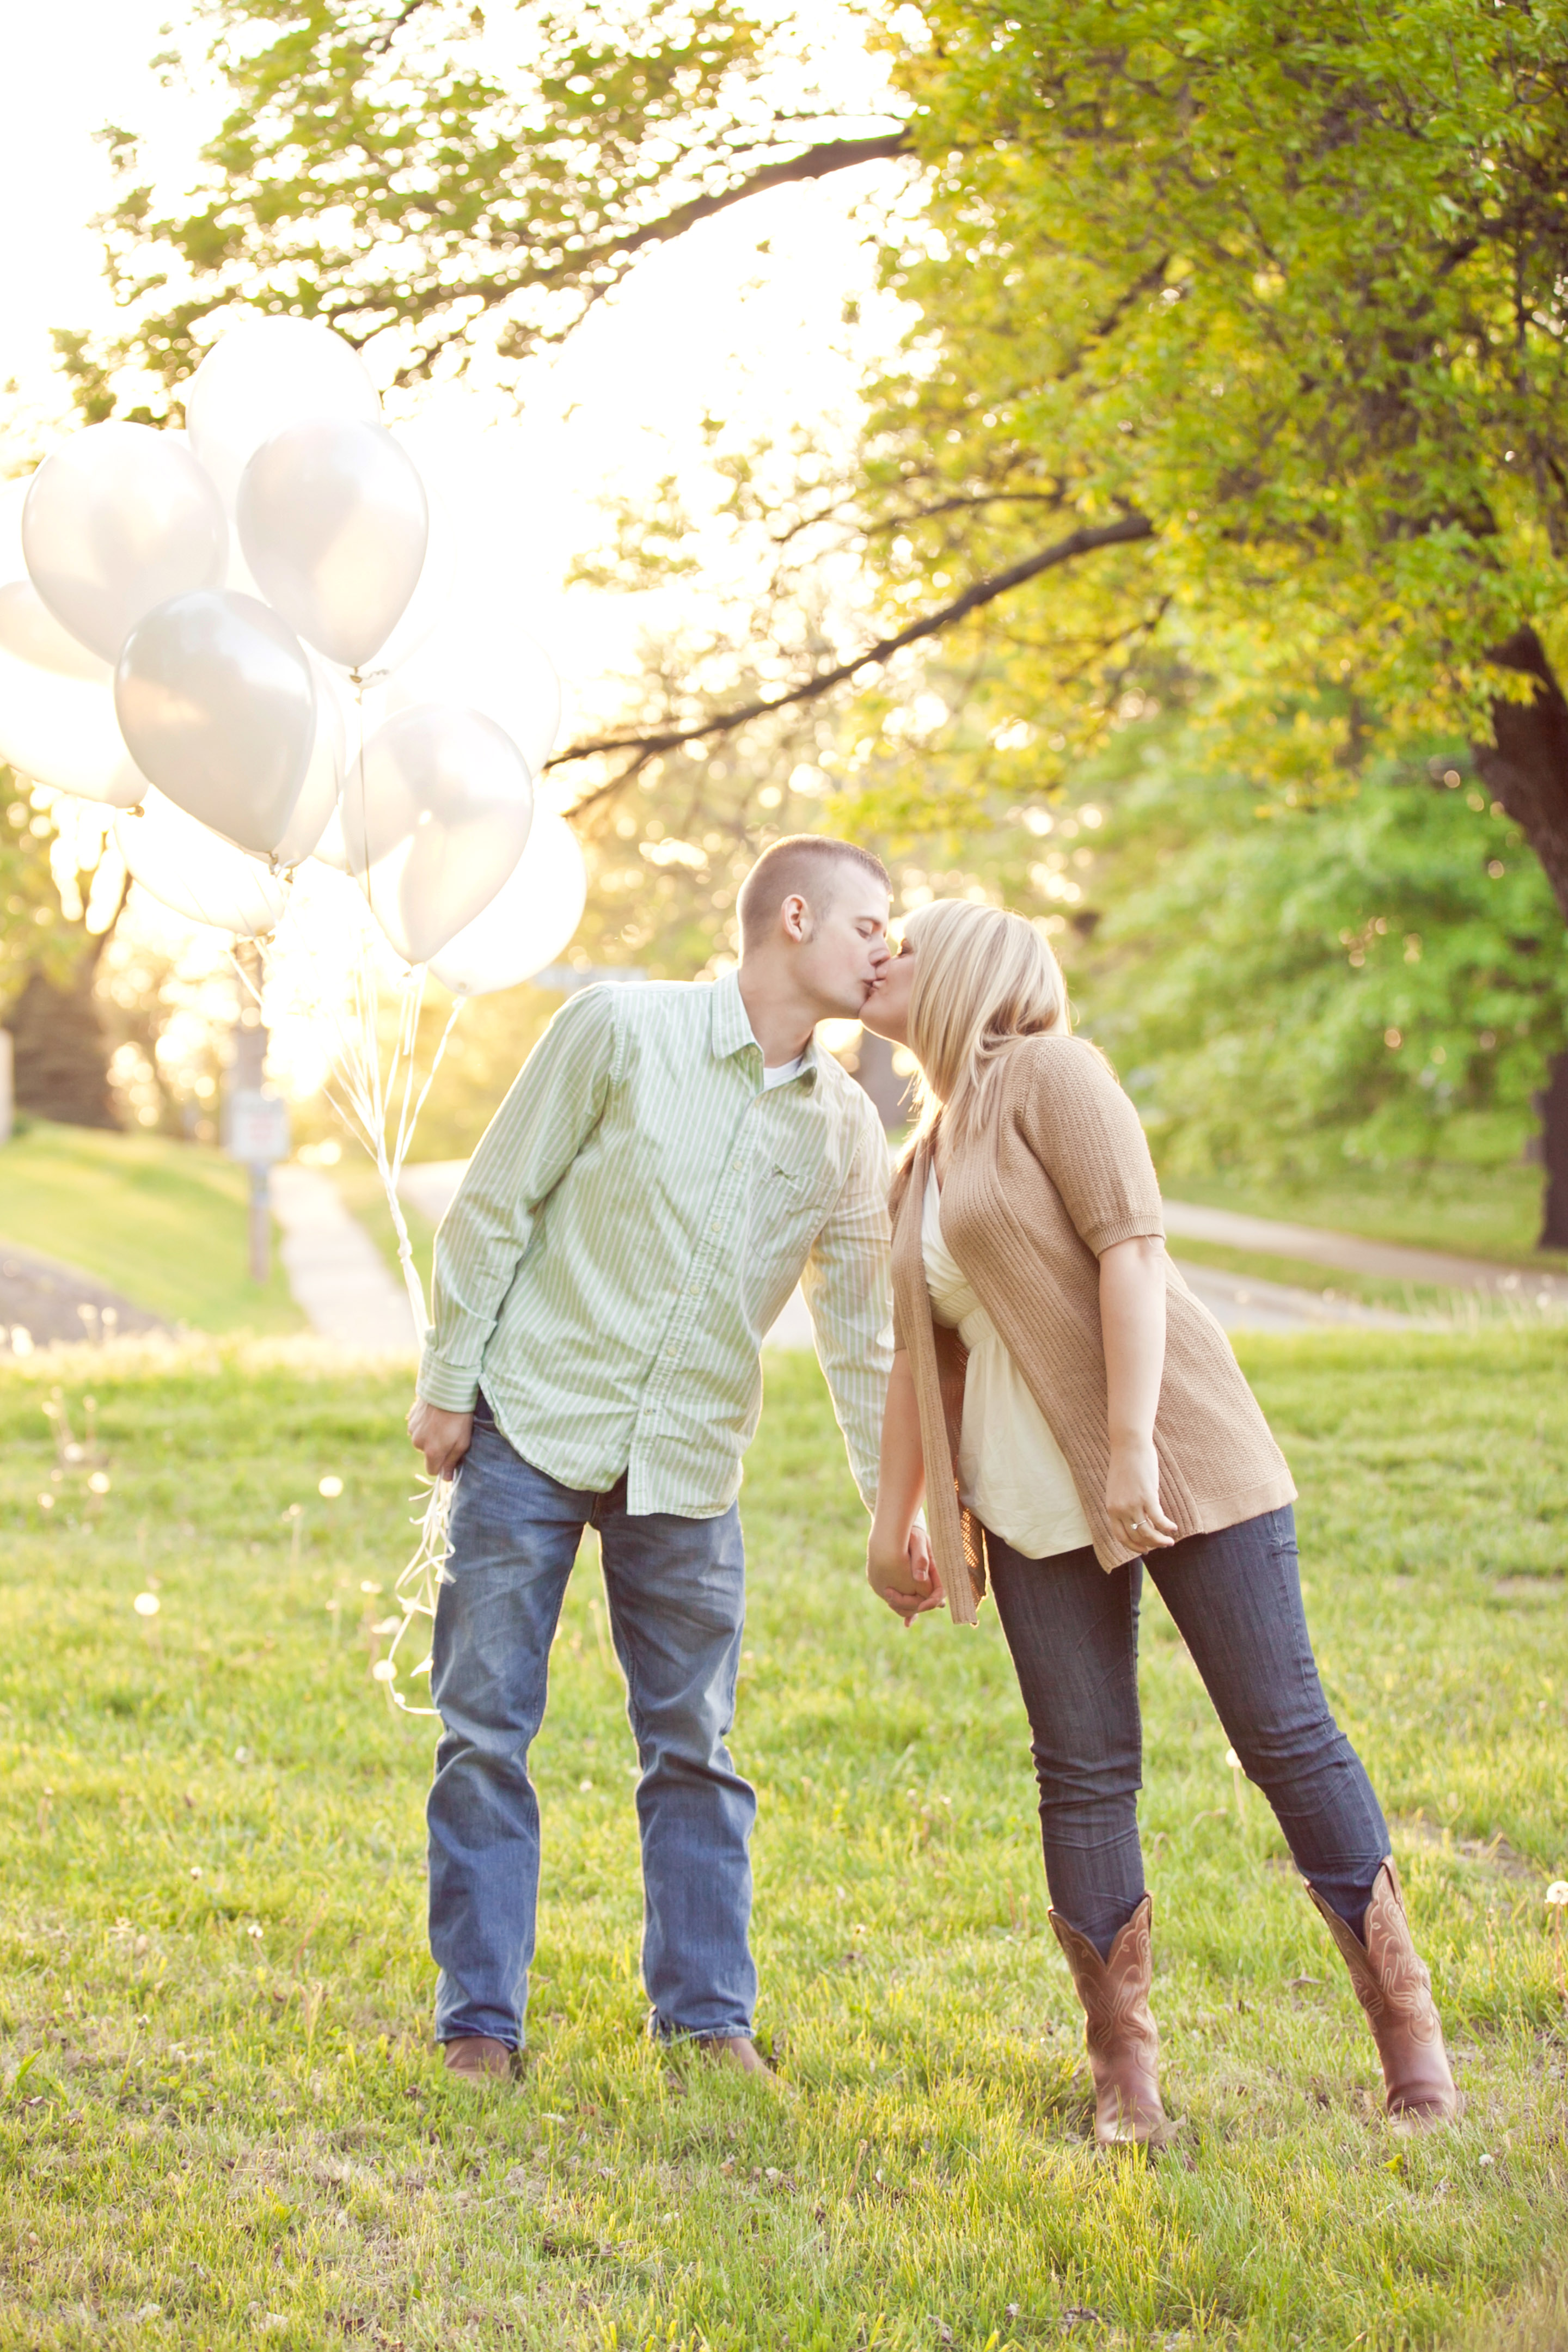 Featured images, Balloons, Spring, McCoy Park, Independence photography, Kansas City Portrait Photography, Jana Marie Photos, sunset